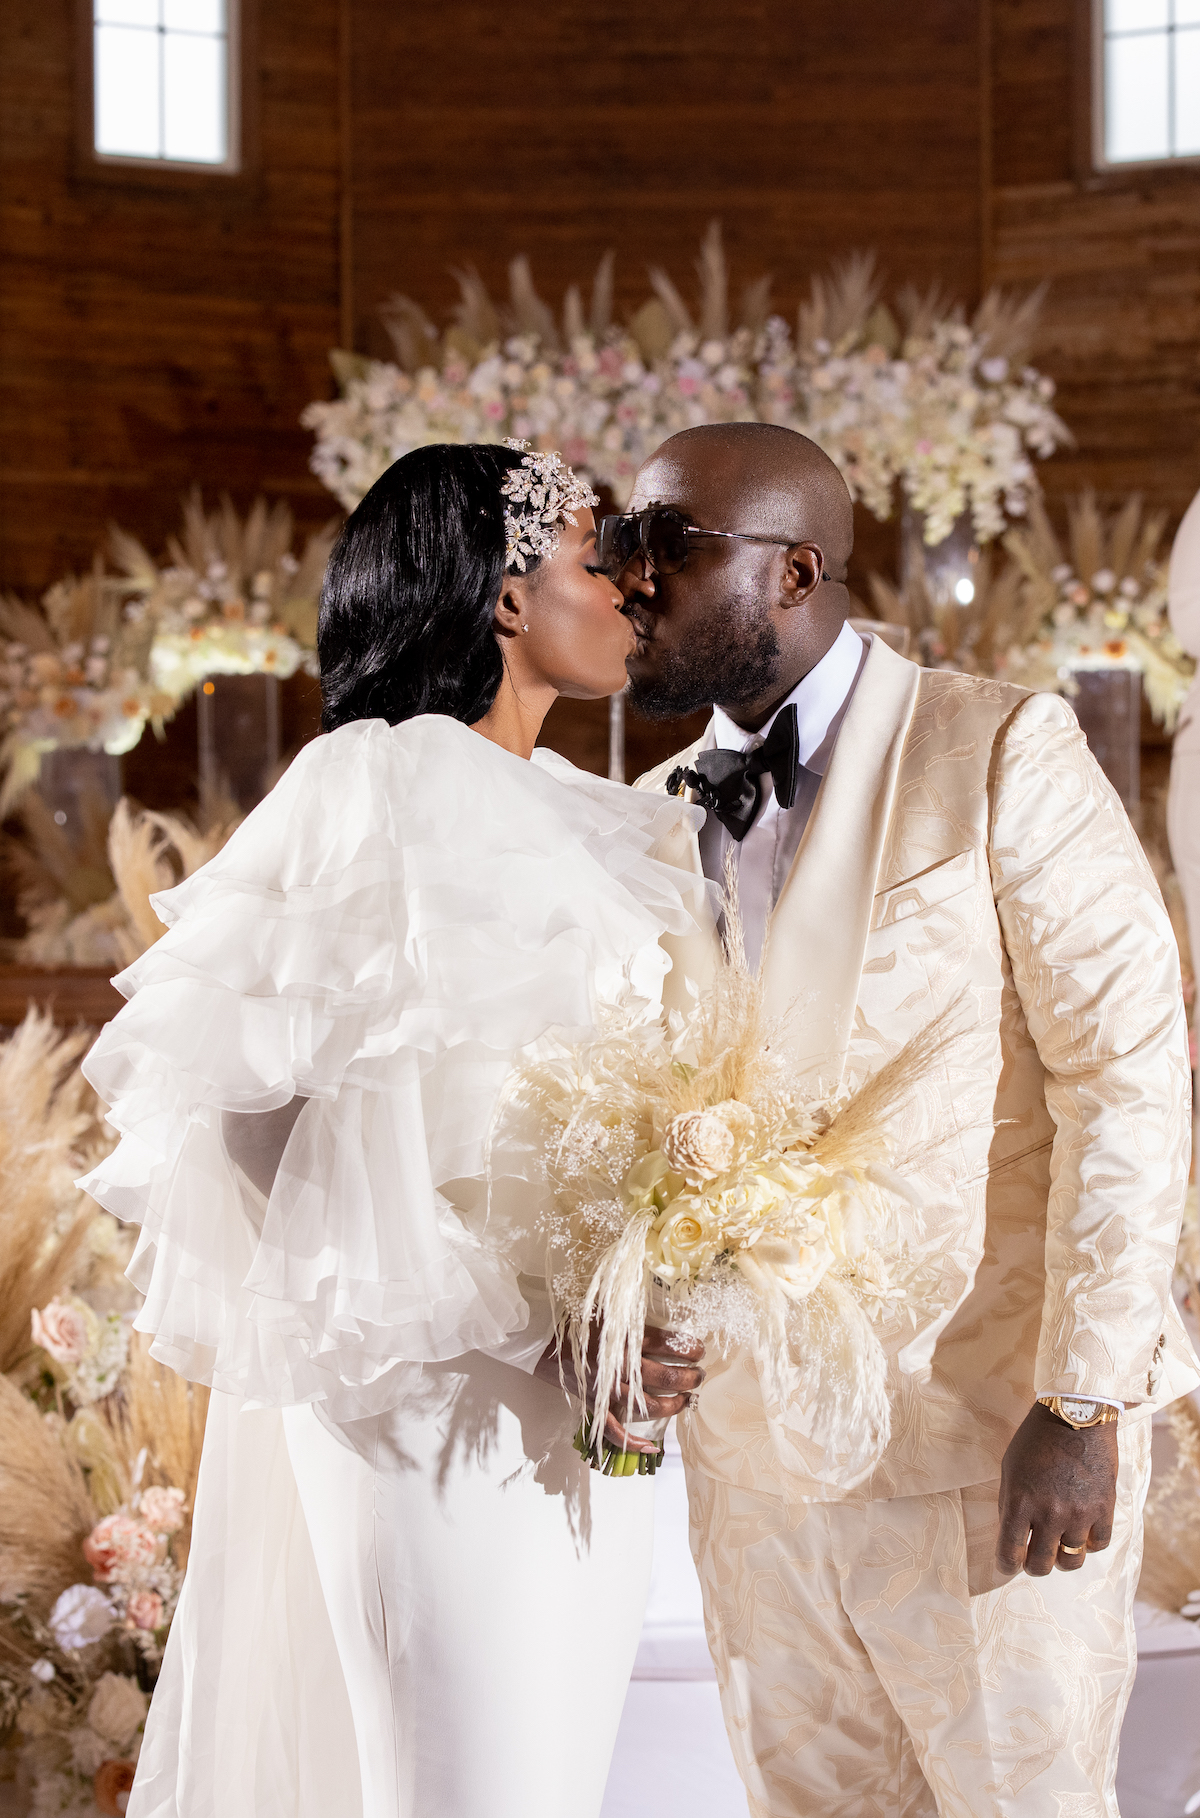 Kye Nelson and her husband, Zuri, celebrate their 10 year vow renewal in New Orleans